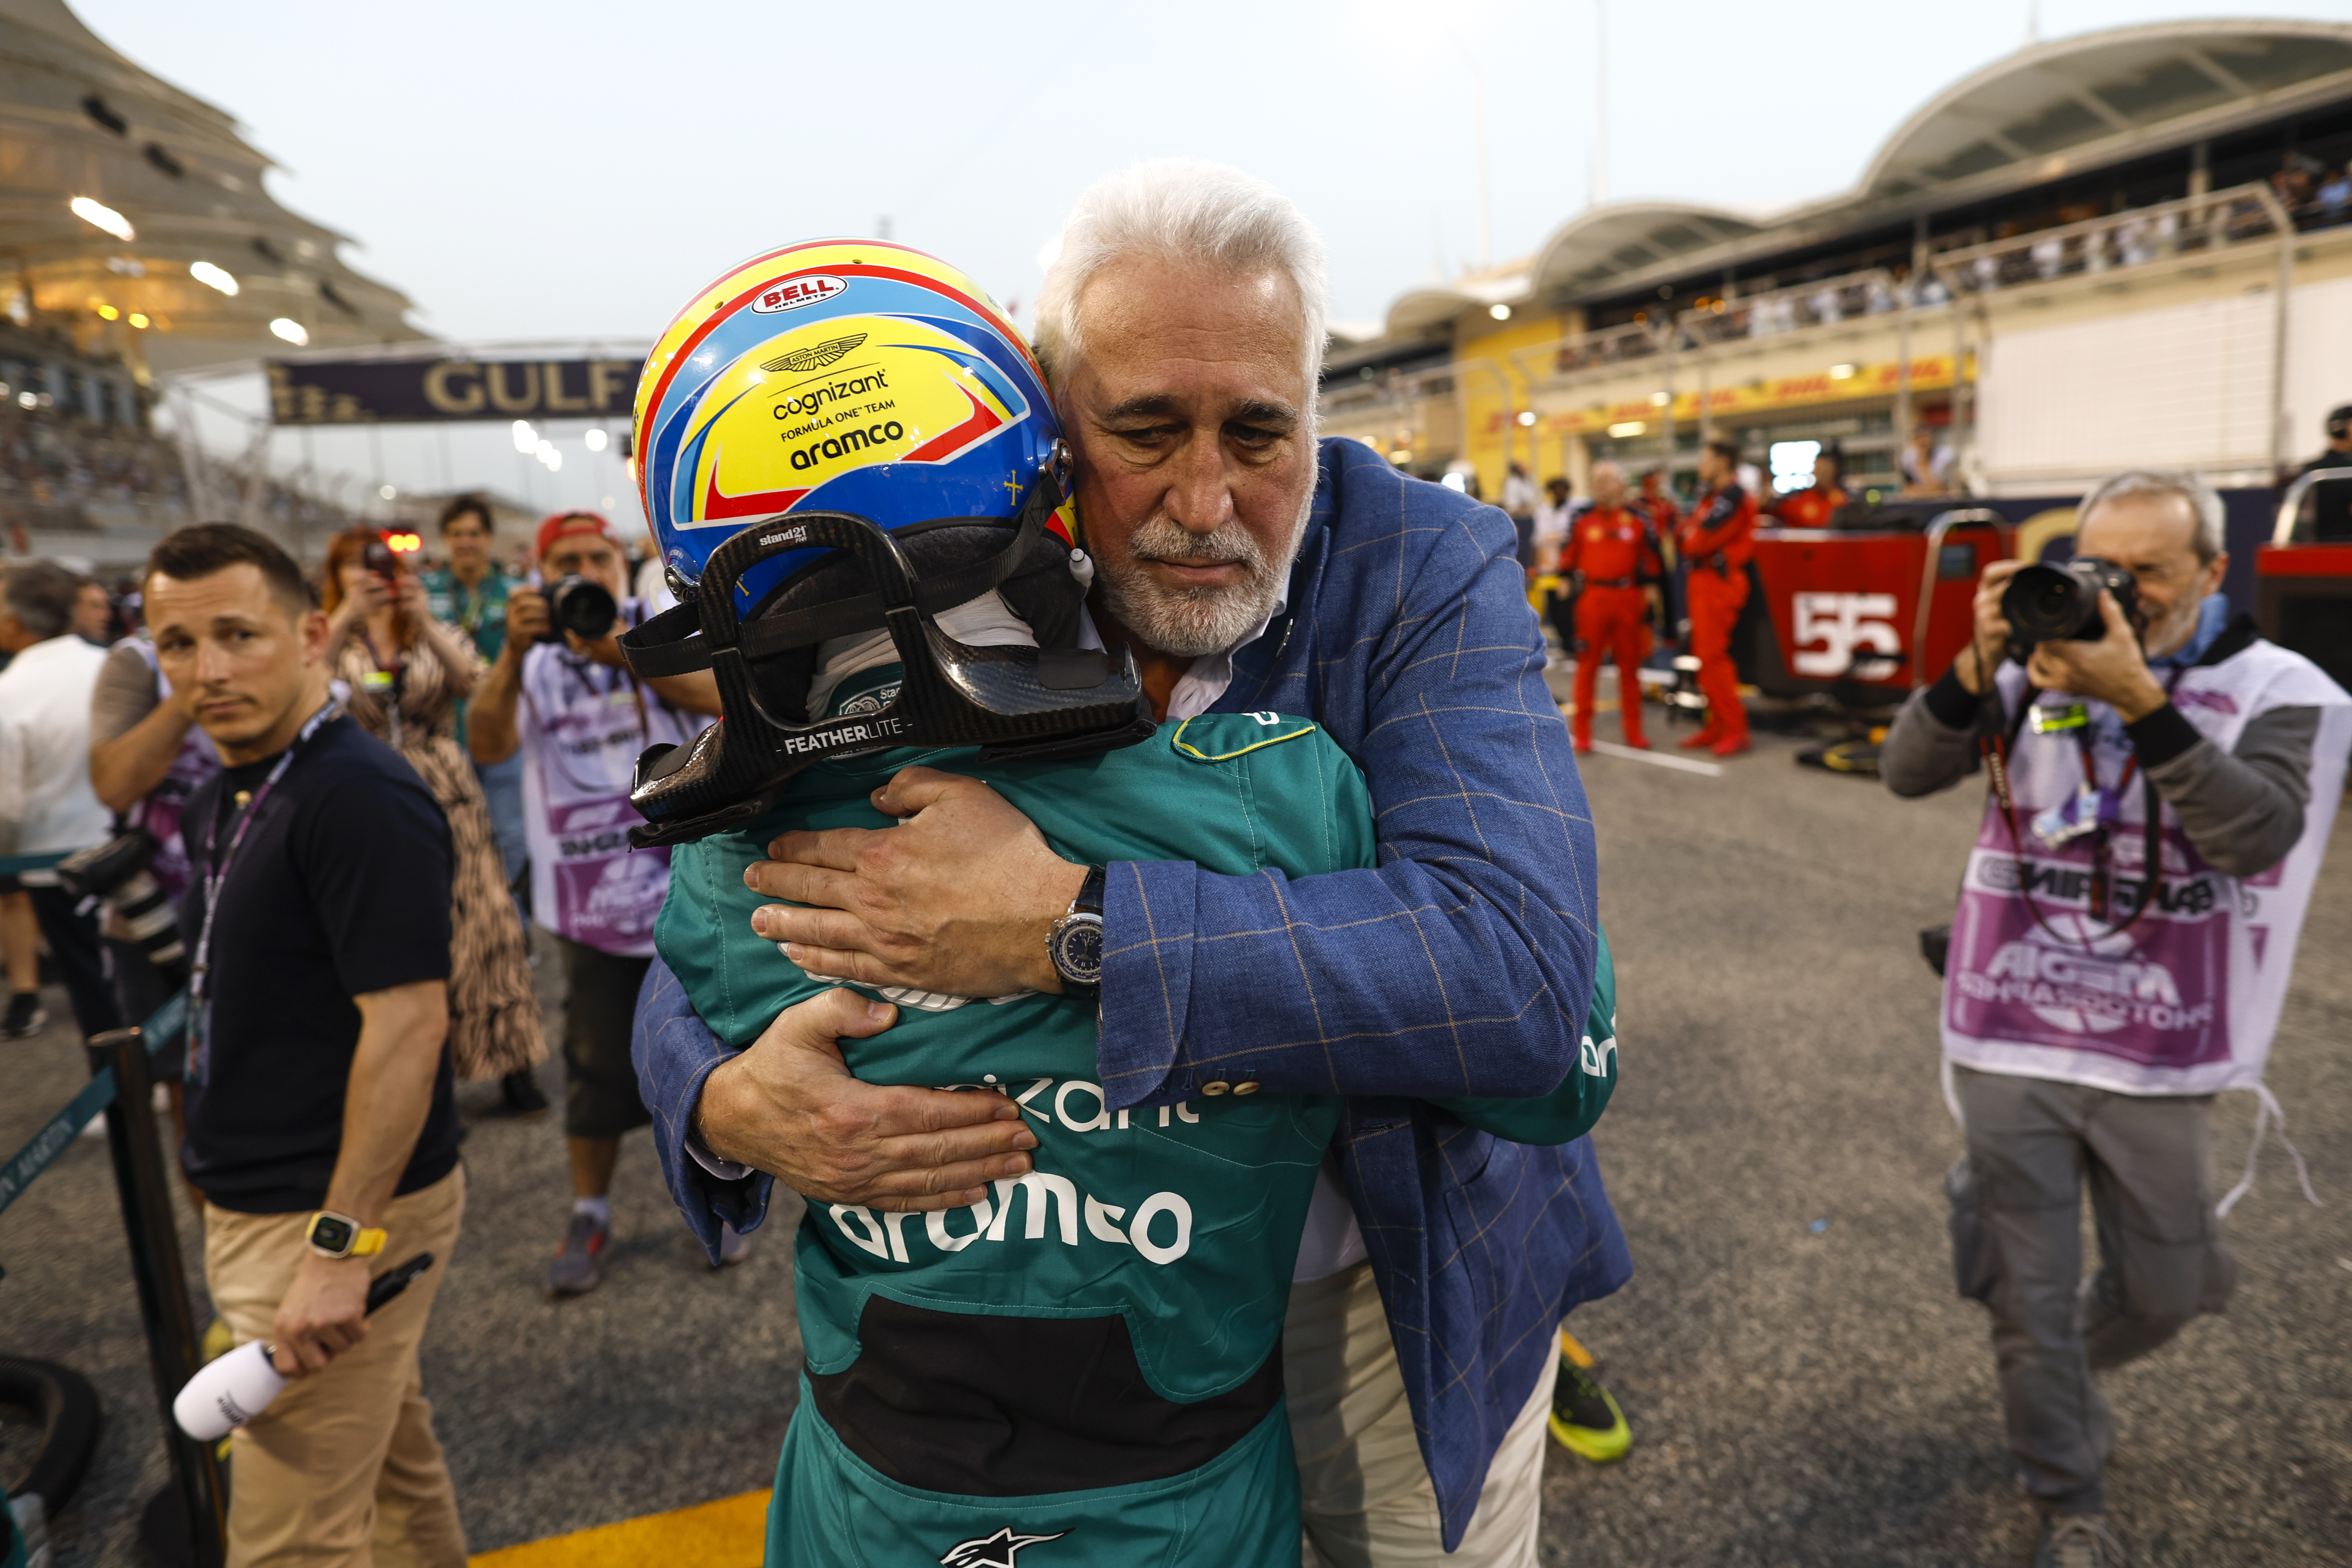 Lawrence Stroll hugs Fernando Alonso effusively after finishing the Bahrain GP.